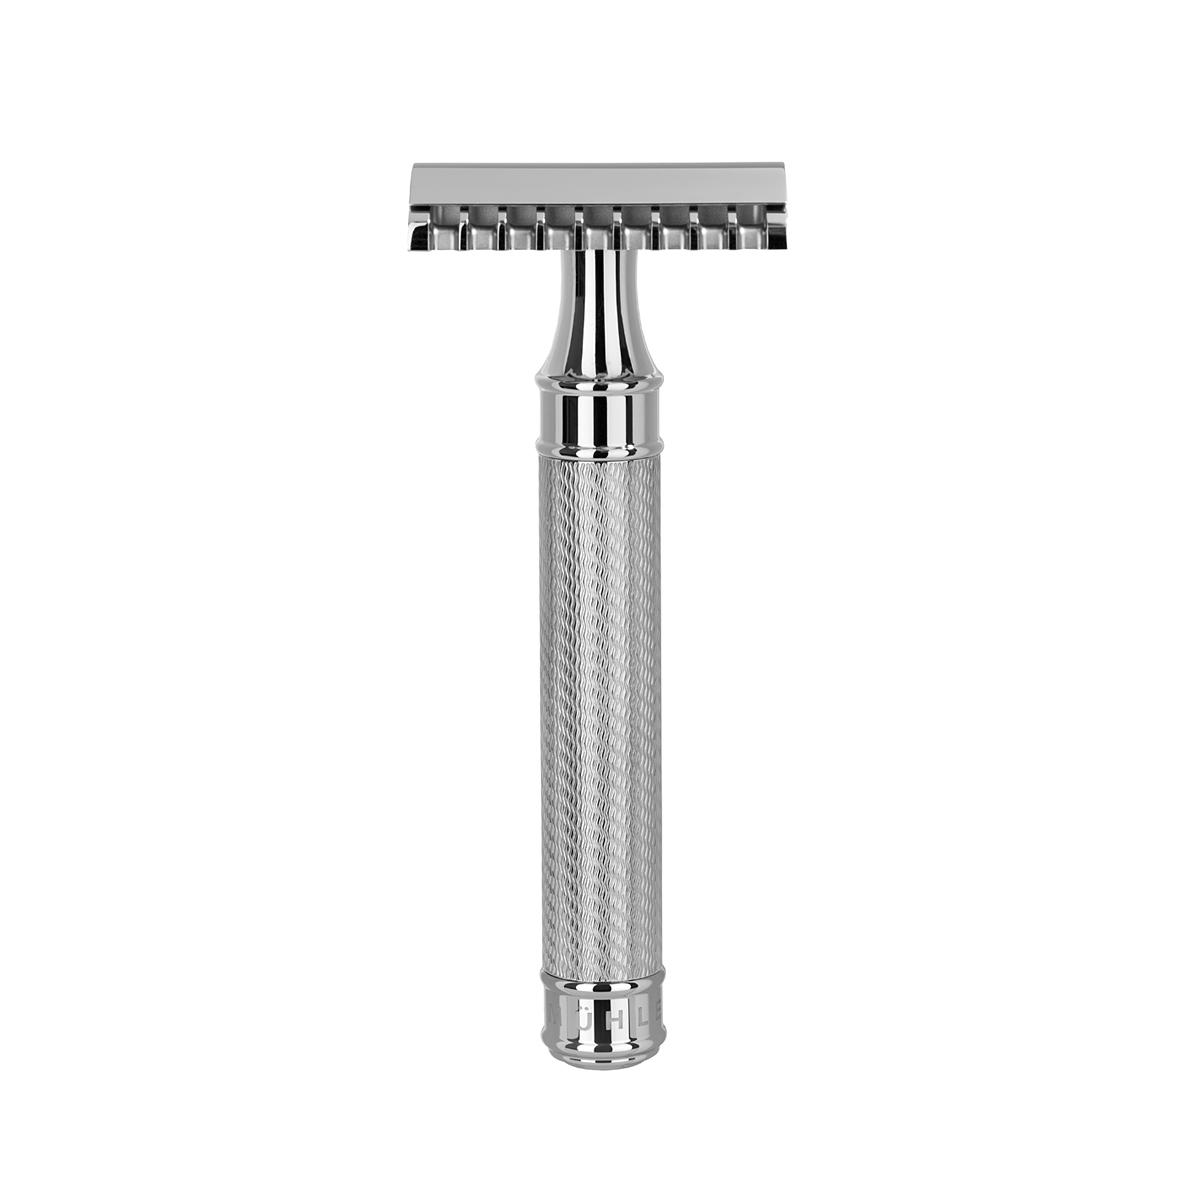 R41GS MÜHLE TRADITIONAL GRANDE Stainless Steel Open Comb Safety Razor